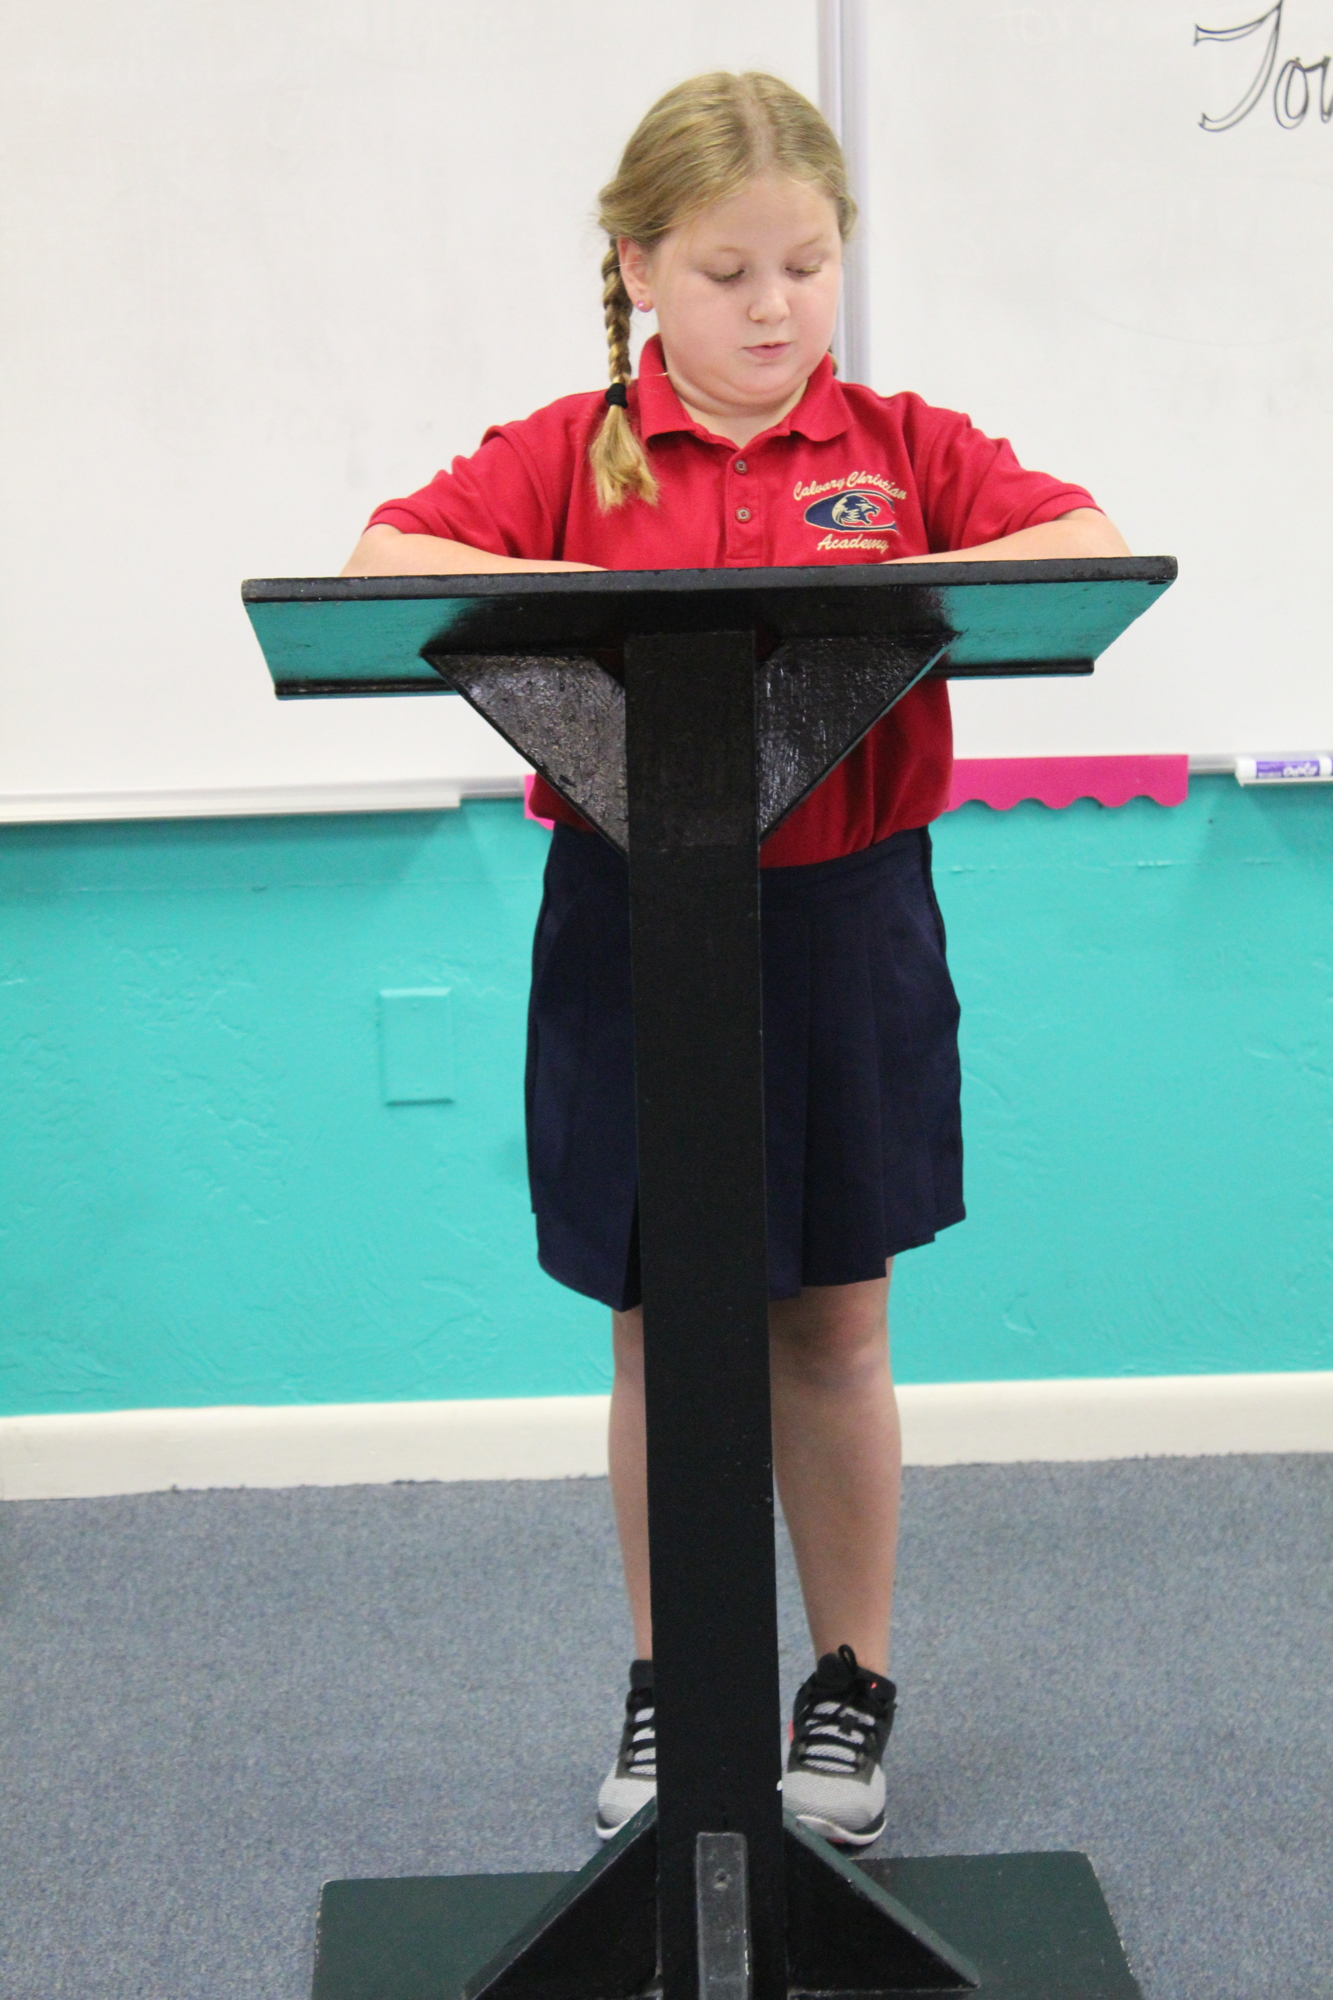 Fourth-grader Mia Rauseo shares her experience attending Calvary Christian Academy thanks to Step up for Students. Photo by Jarleene Almenas